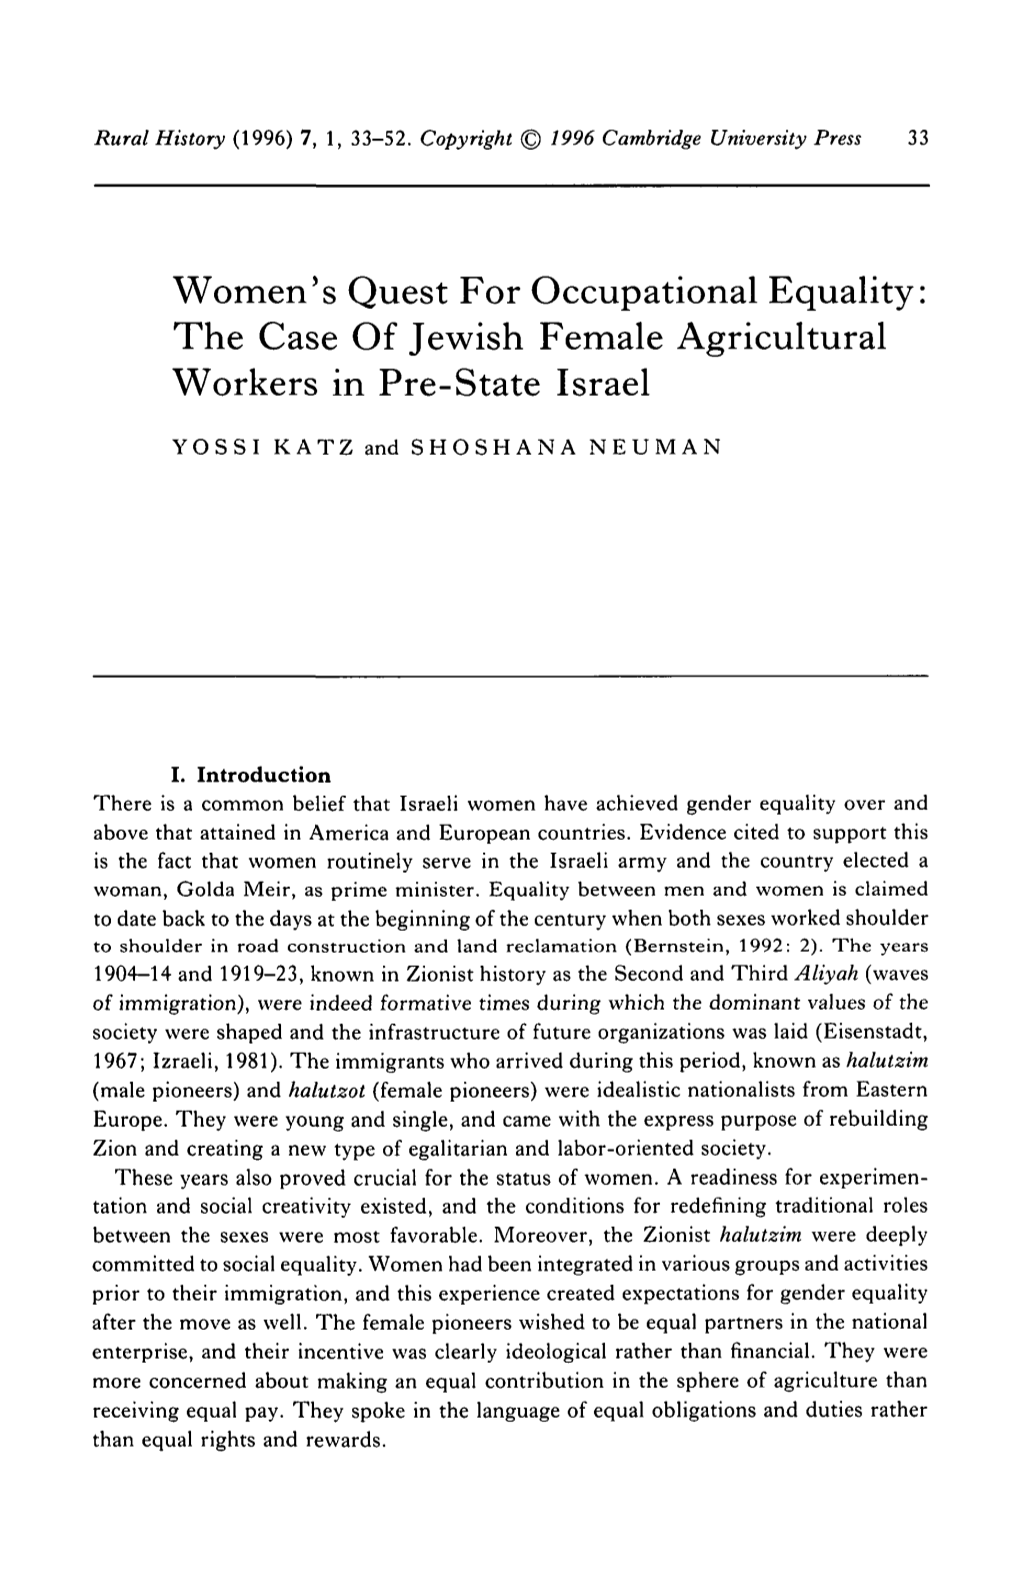 Women's Quest for Occupational Equality: the Case of Agricultural